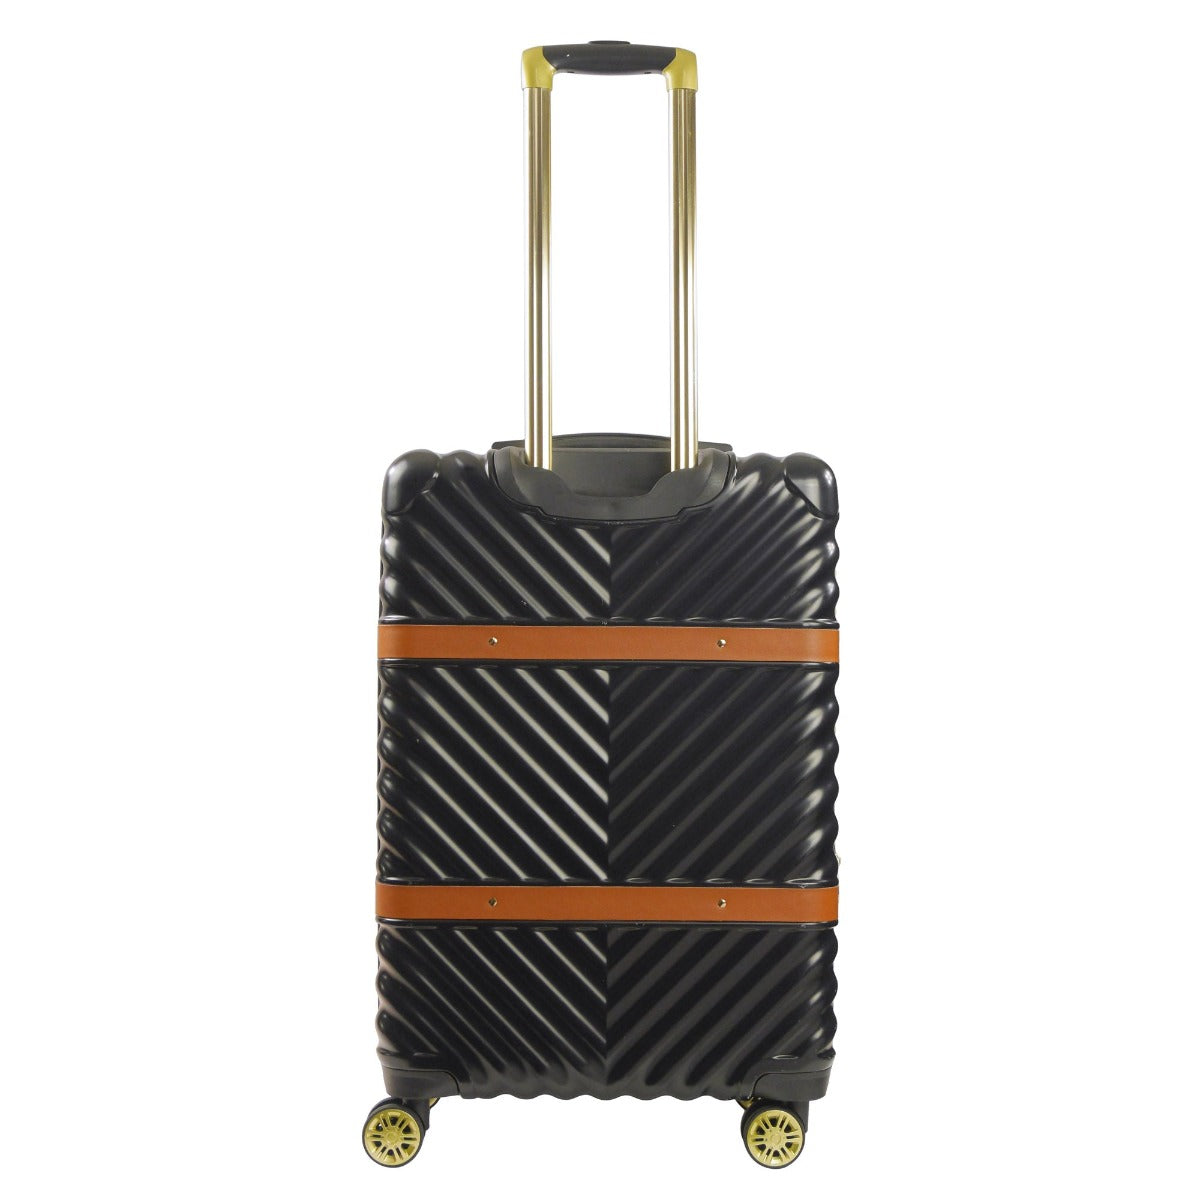 Christian Siriano New York Stella 25" hardside spinner suitcase black - best checked luggage for travelling